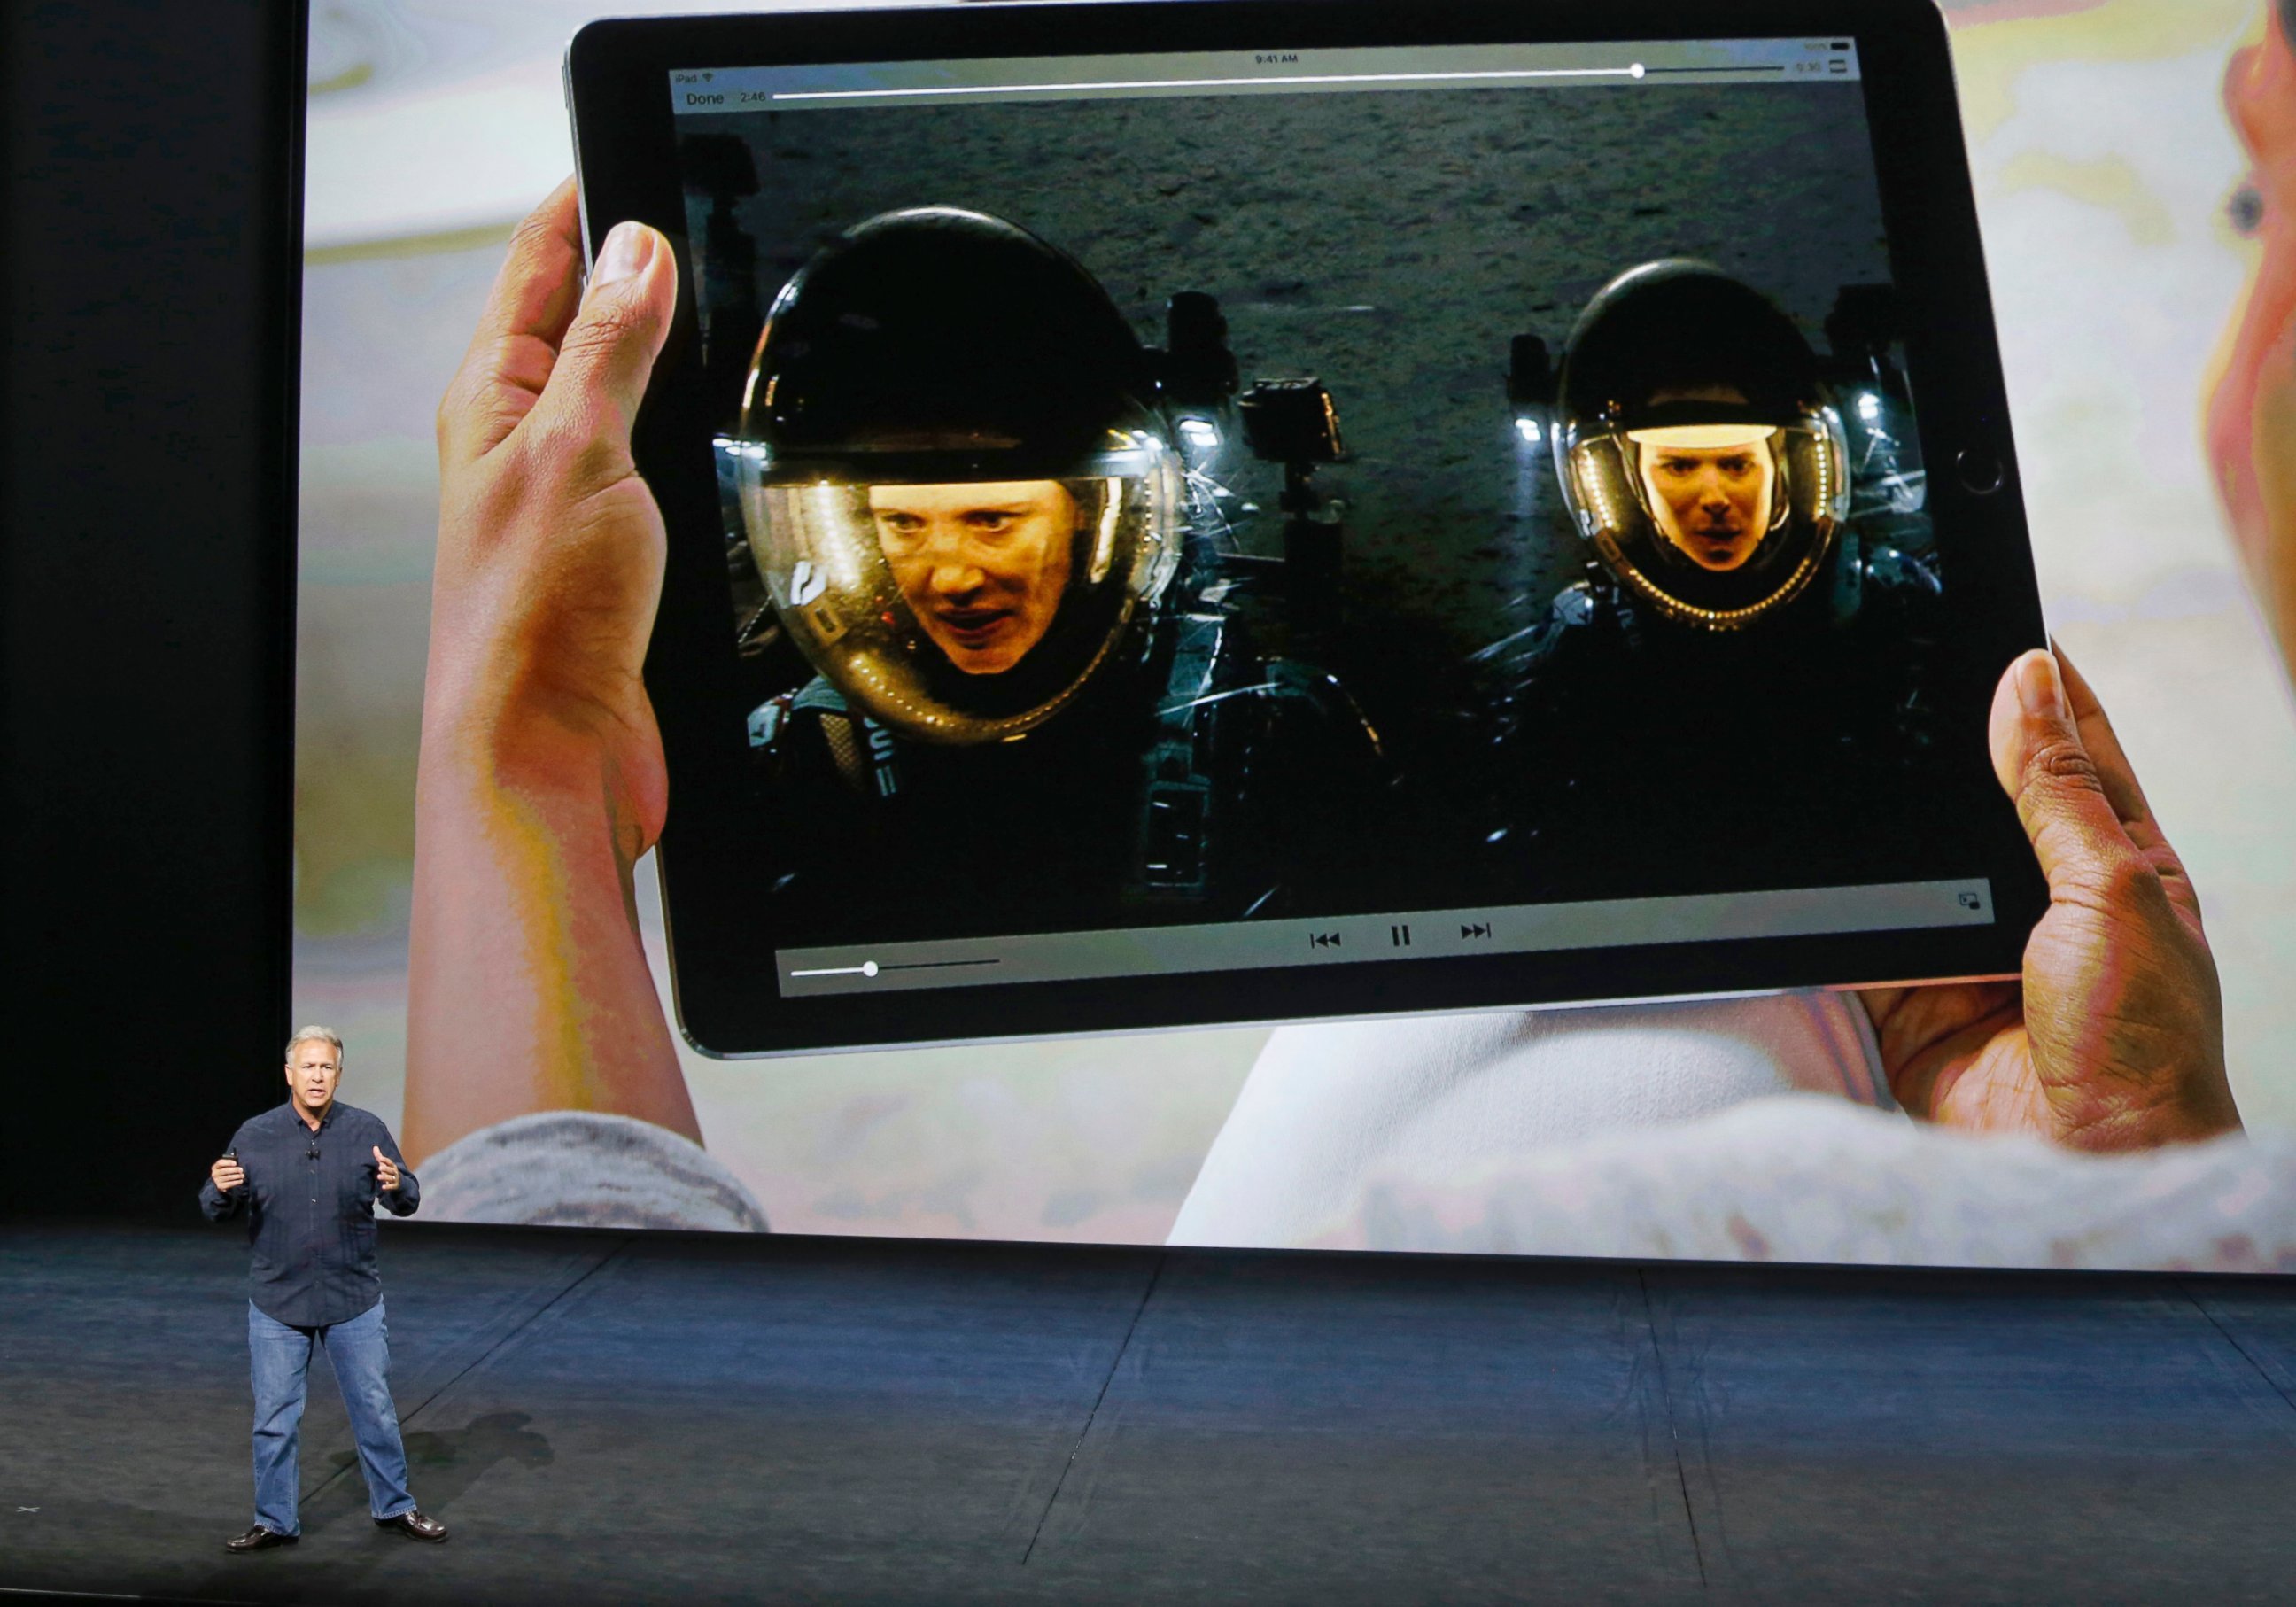 PHOTO: Phil Schiller, Senior Vice President of Worldwide Marketing at Apple Inc, speaks about the new iPad Pro during an Apple media event in San Francisco, Sept. 9, 2015.